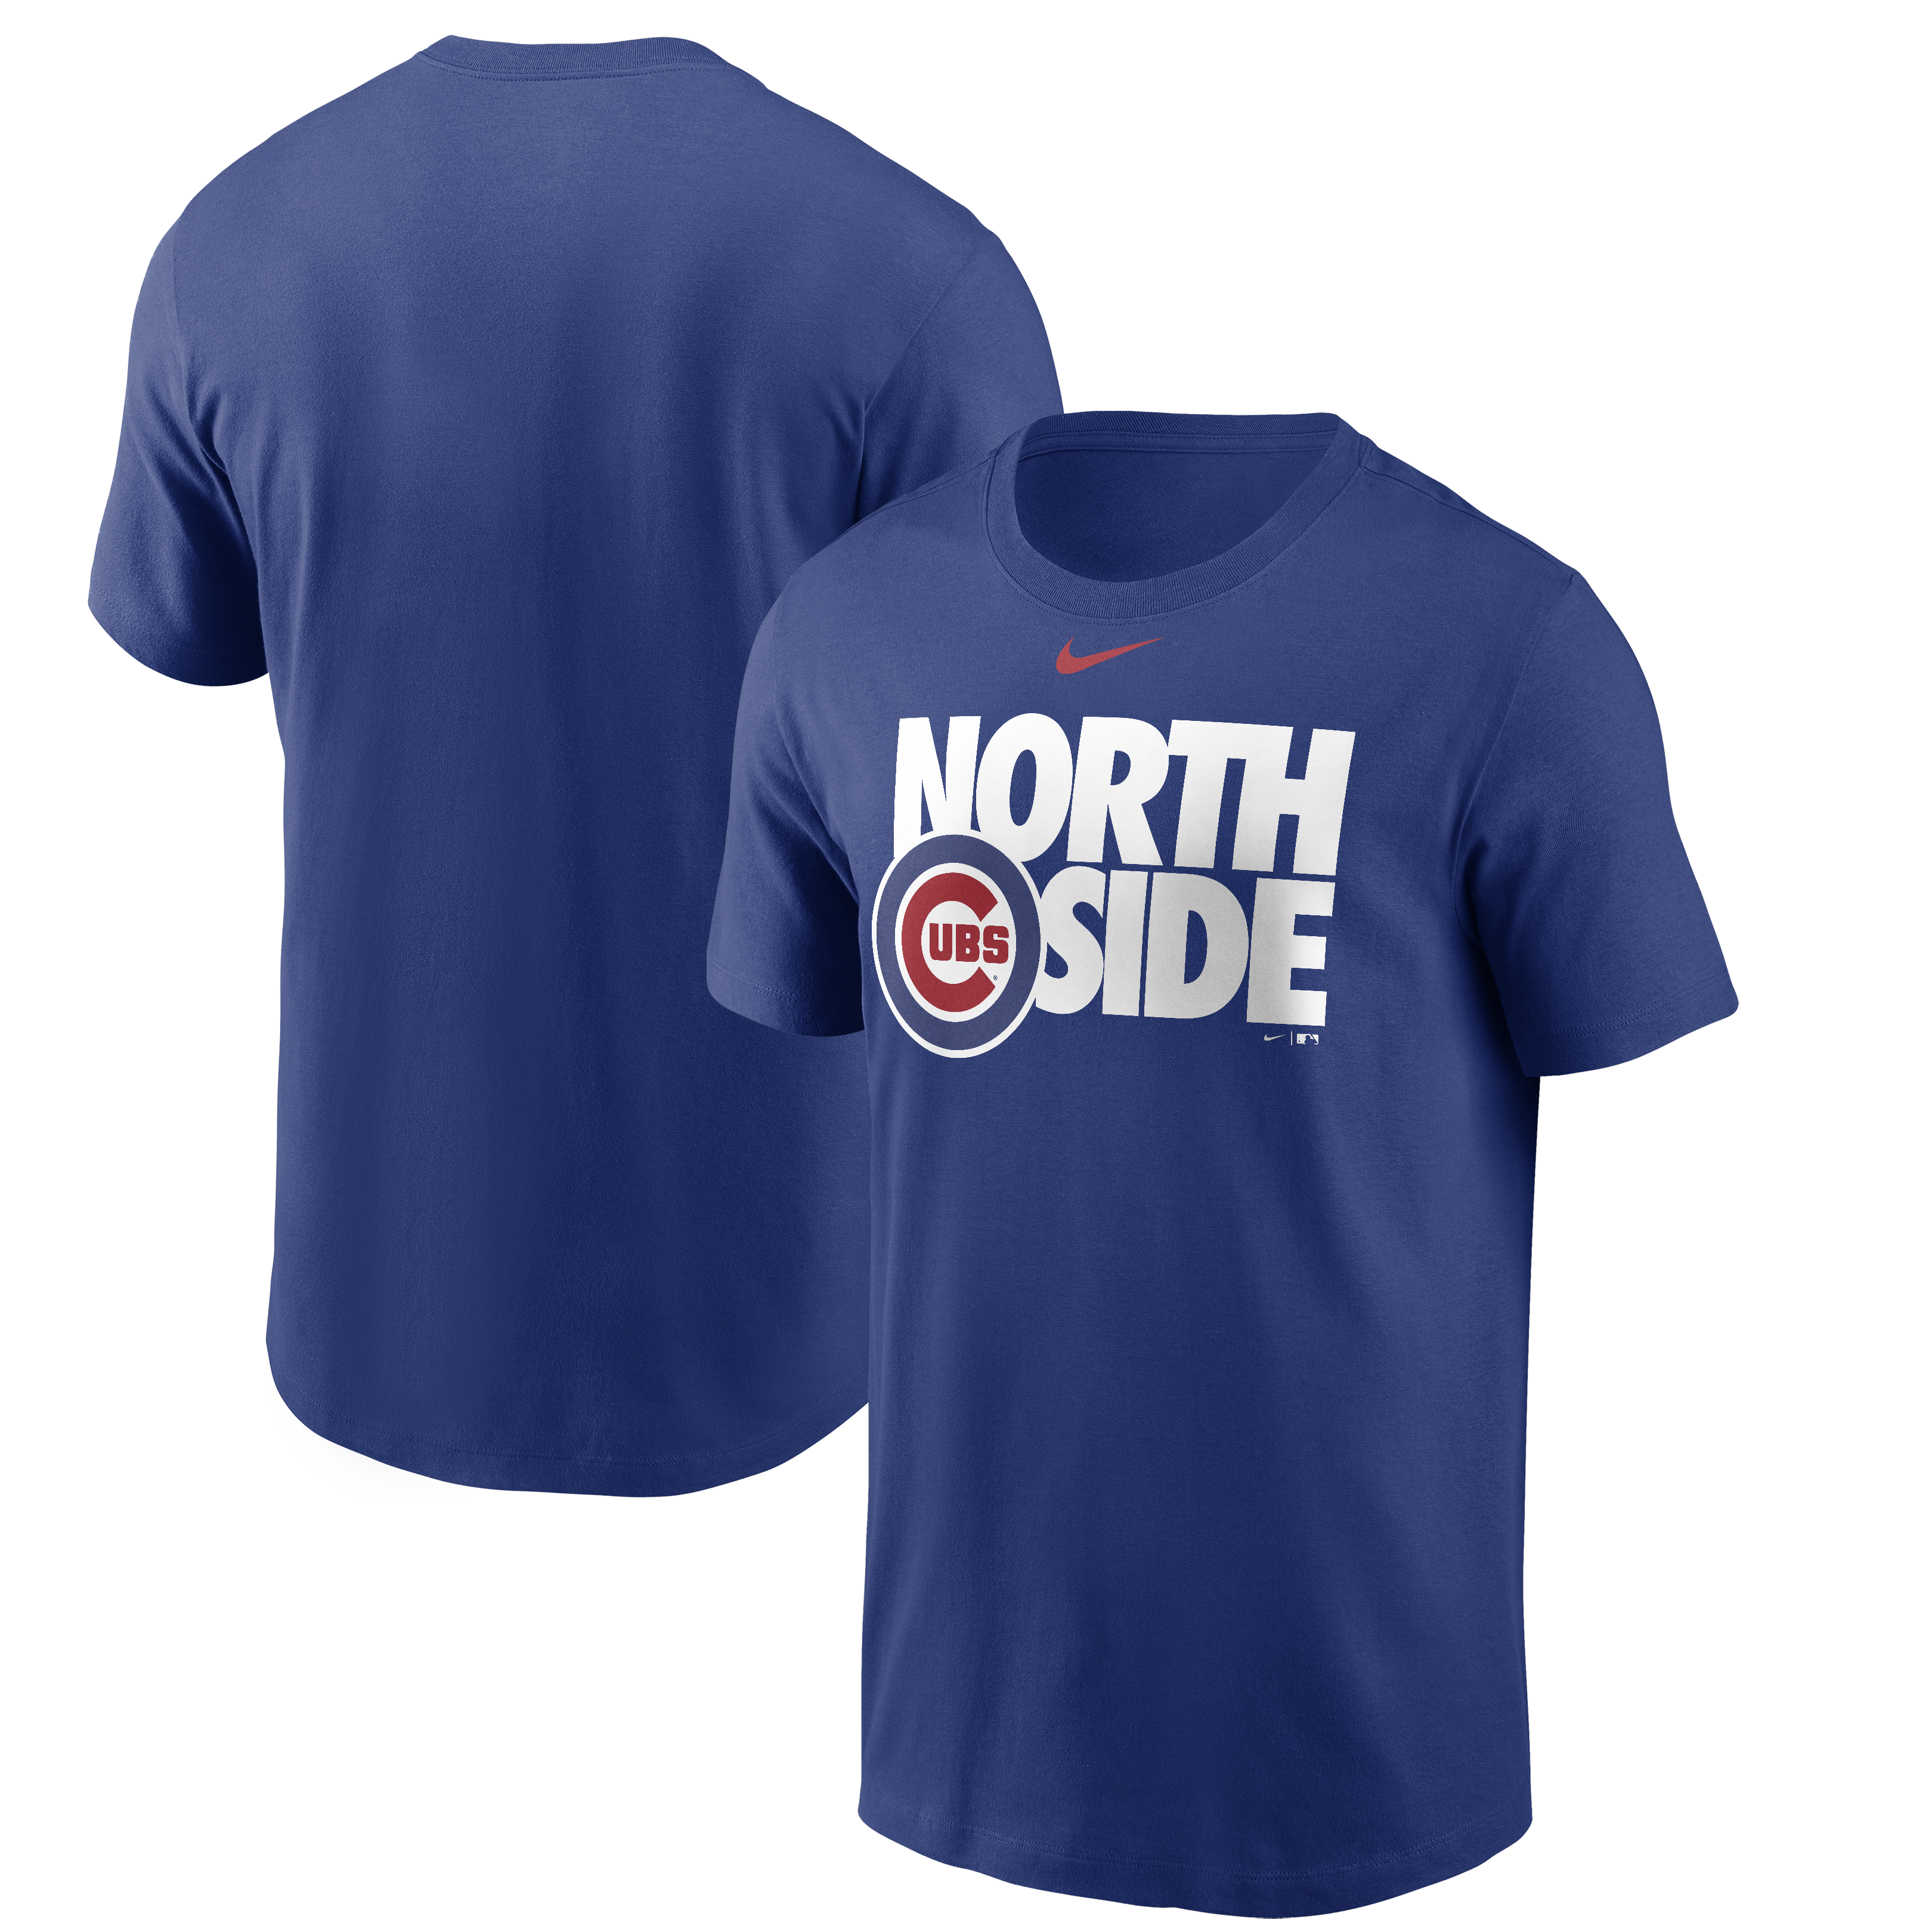 The Best New Chicago Cubs T-Shirts